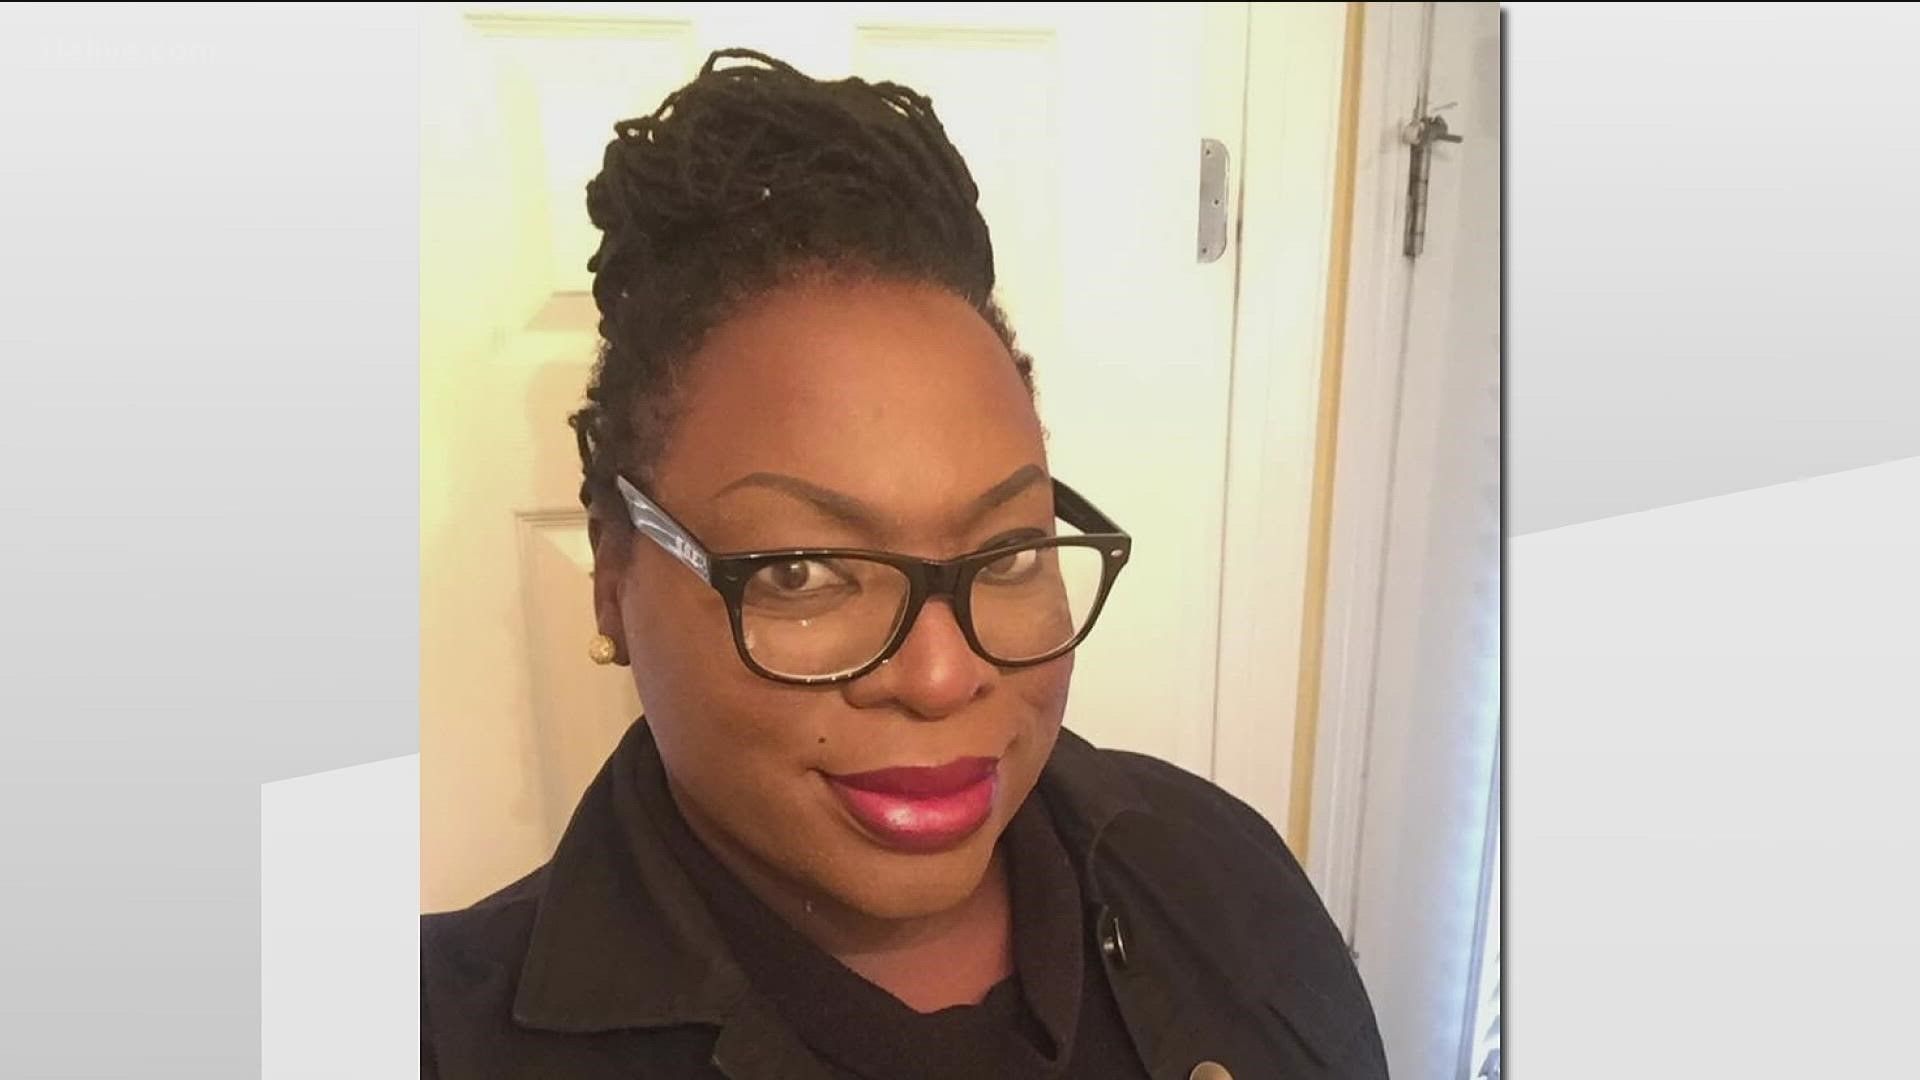 Tori Cooper is the first Black transgender woman to be appointed to the Presidential Advisory Council on HIV and AIDS (PACHA).